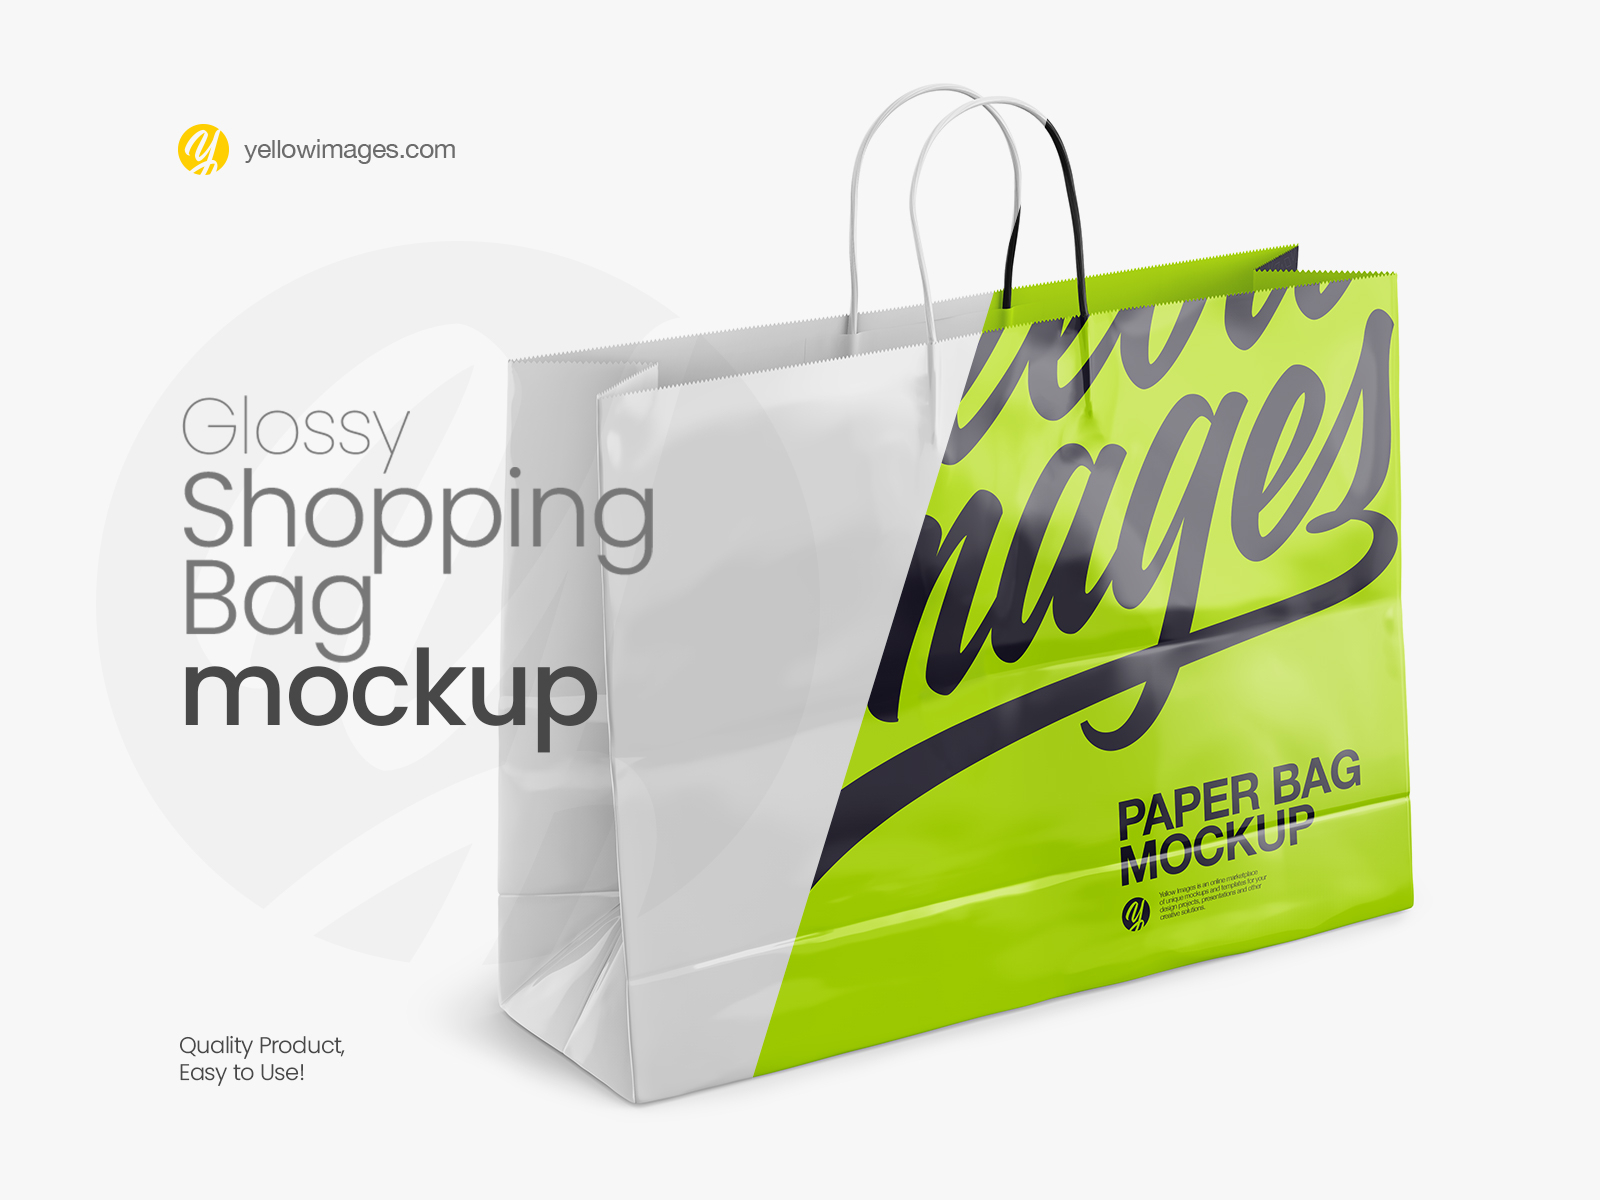 Download Packaging Sticker Mockup Download Free And Premium Psd Mockup Templates And Design Assets PSD Mockup Templates